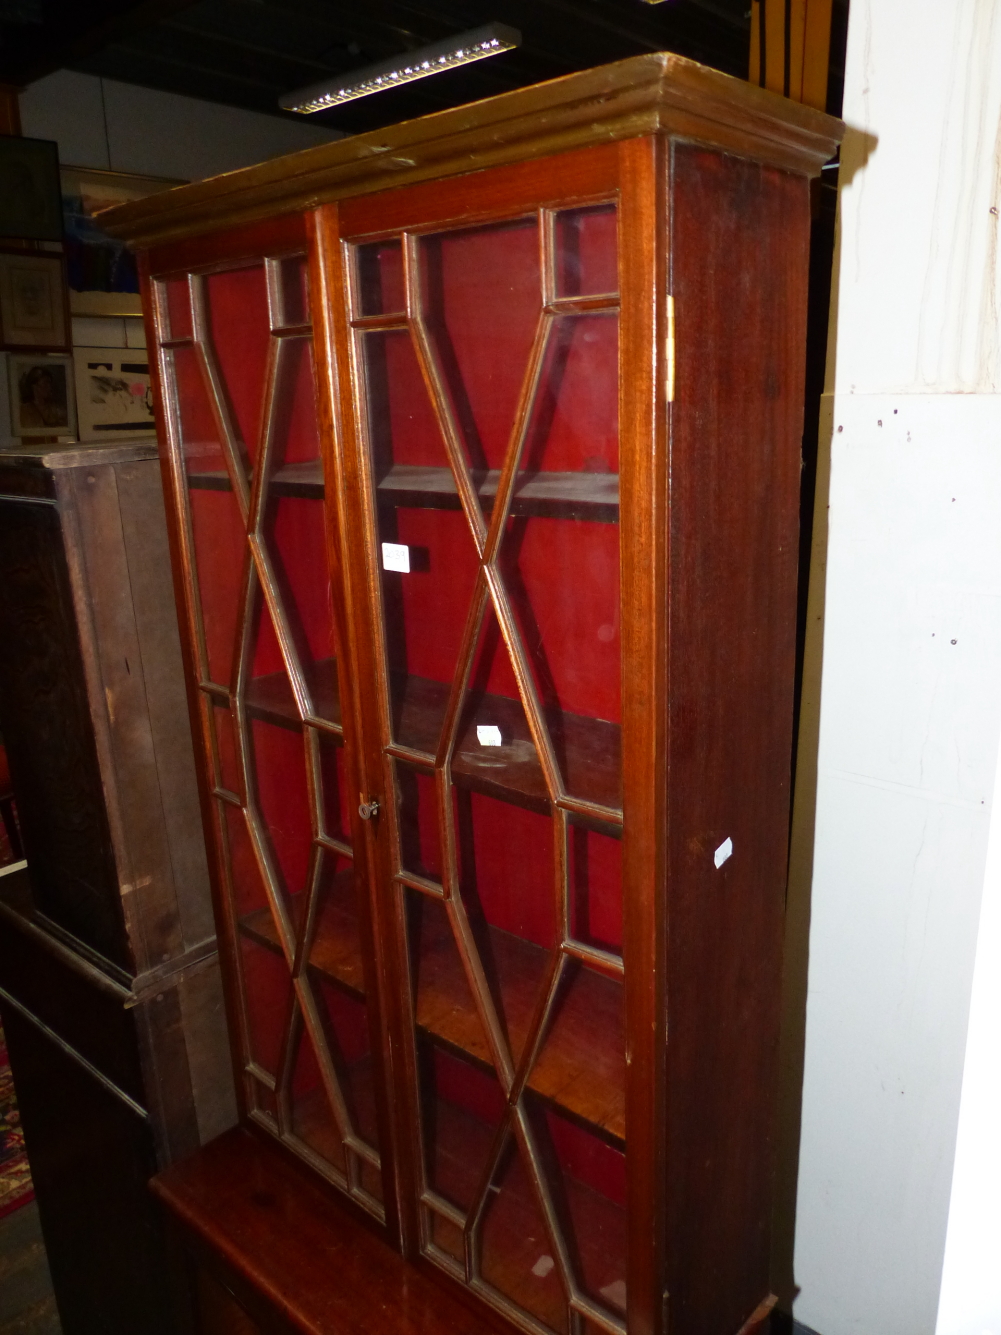 A 19th C. MAHOGANY DISPLAY CABINET, THE UPPER HALF WITH ASTRAGAL GLAZED DOOR, THE BASE WITH A - Image 6 of 9